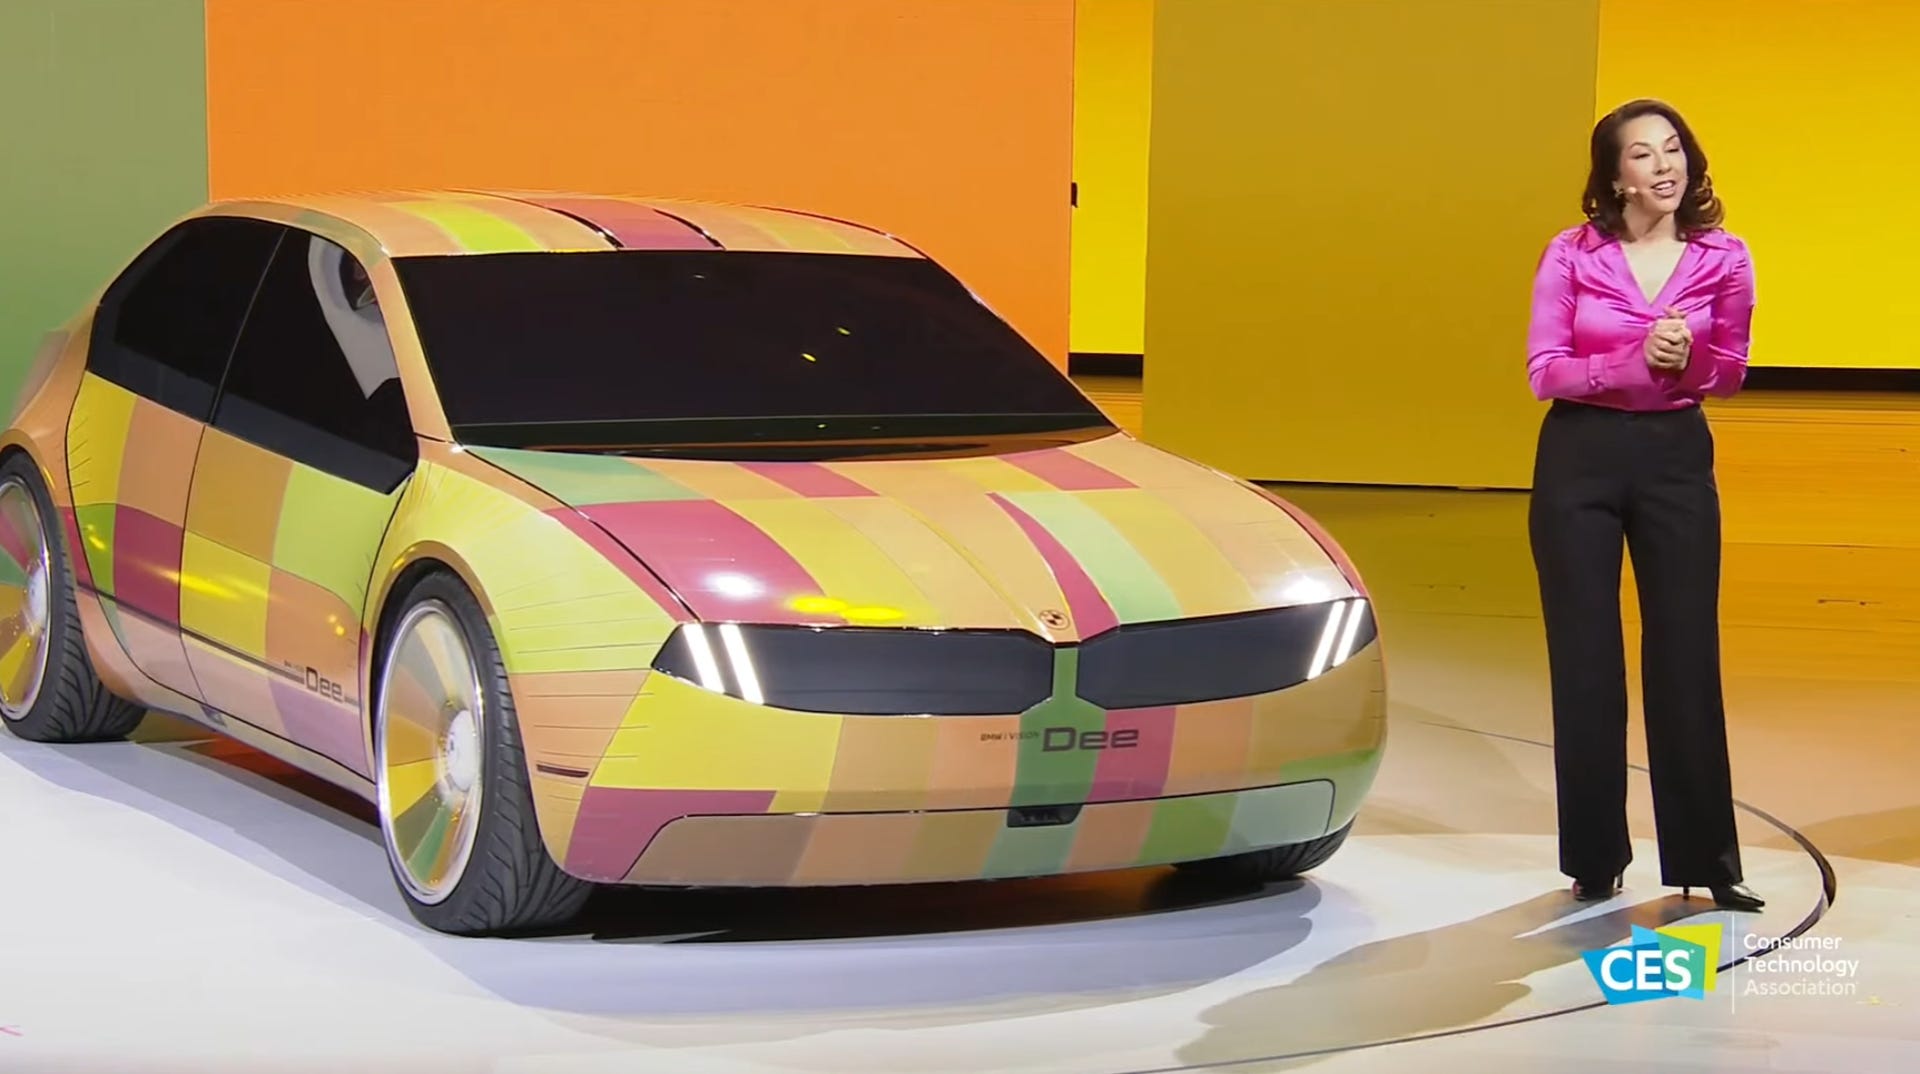 The Dee concept vehicle sits next to a presenter, with the car's outside skin split in geometric zones, all different colors.